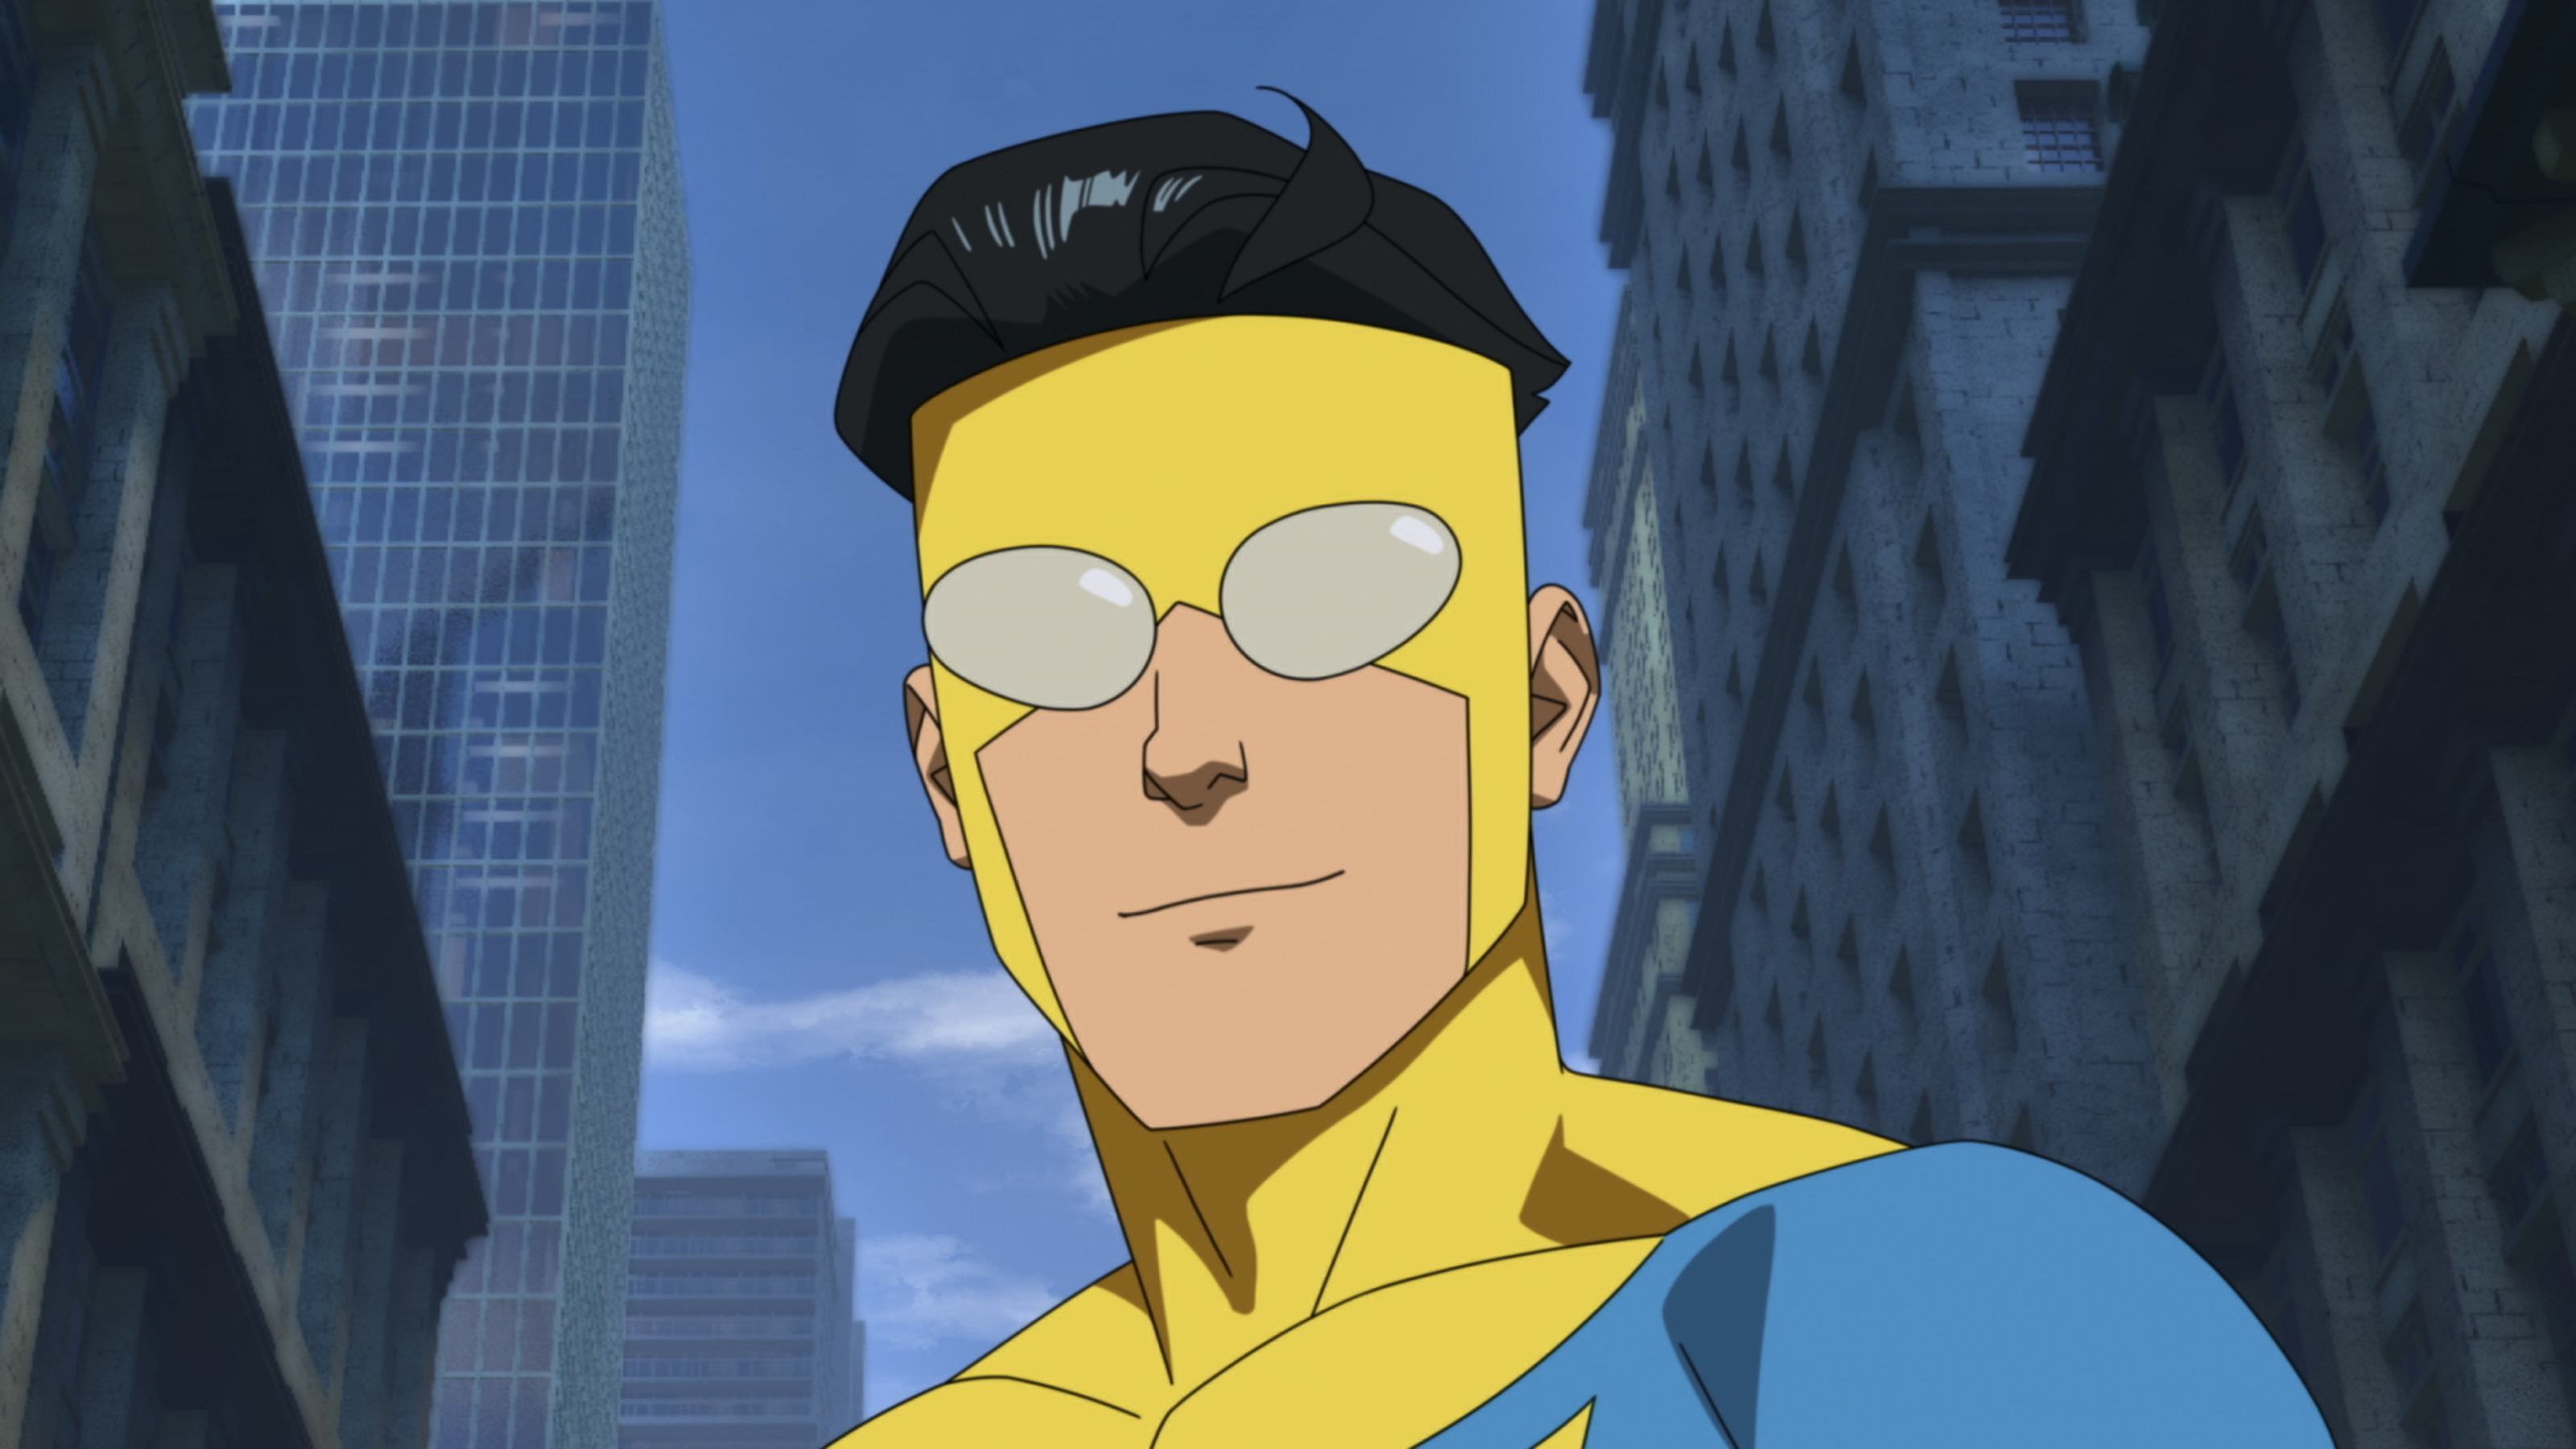 When does the next episode of invincible come out?